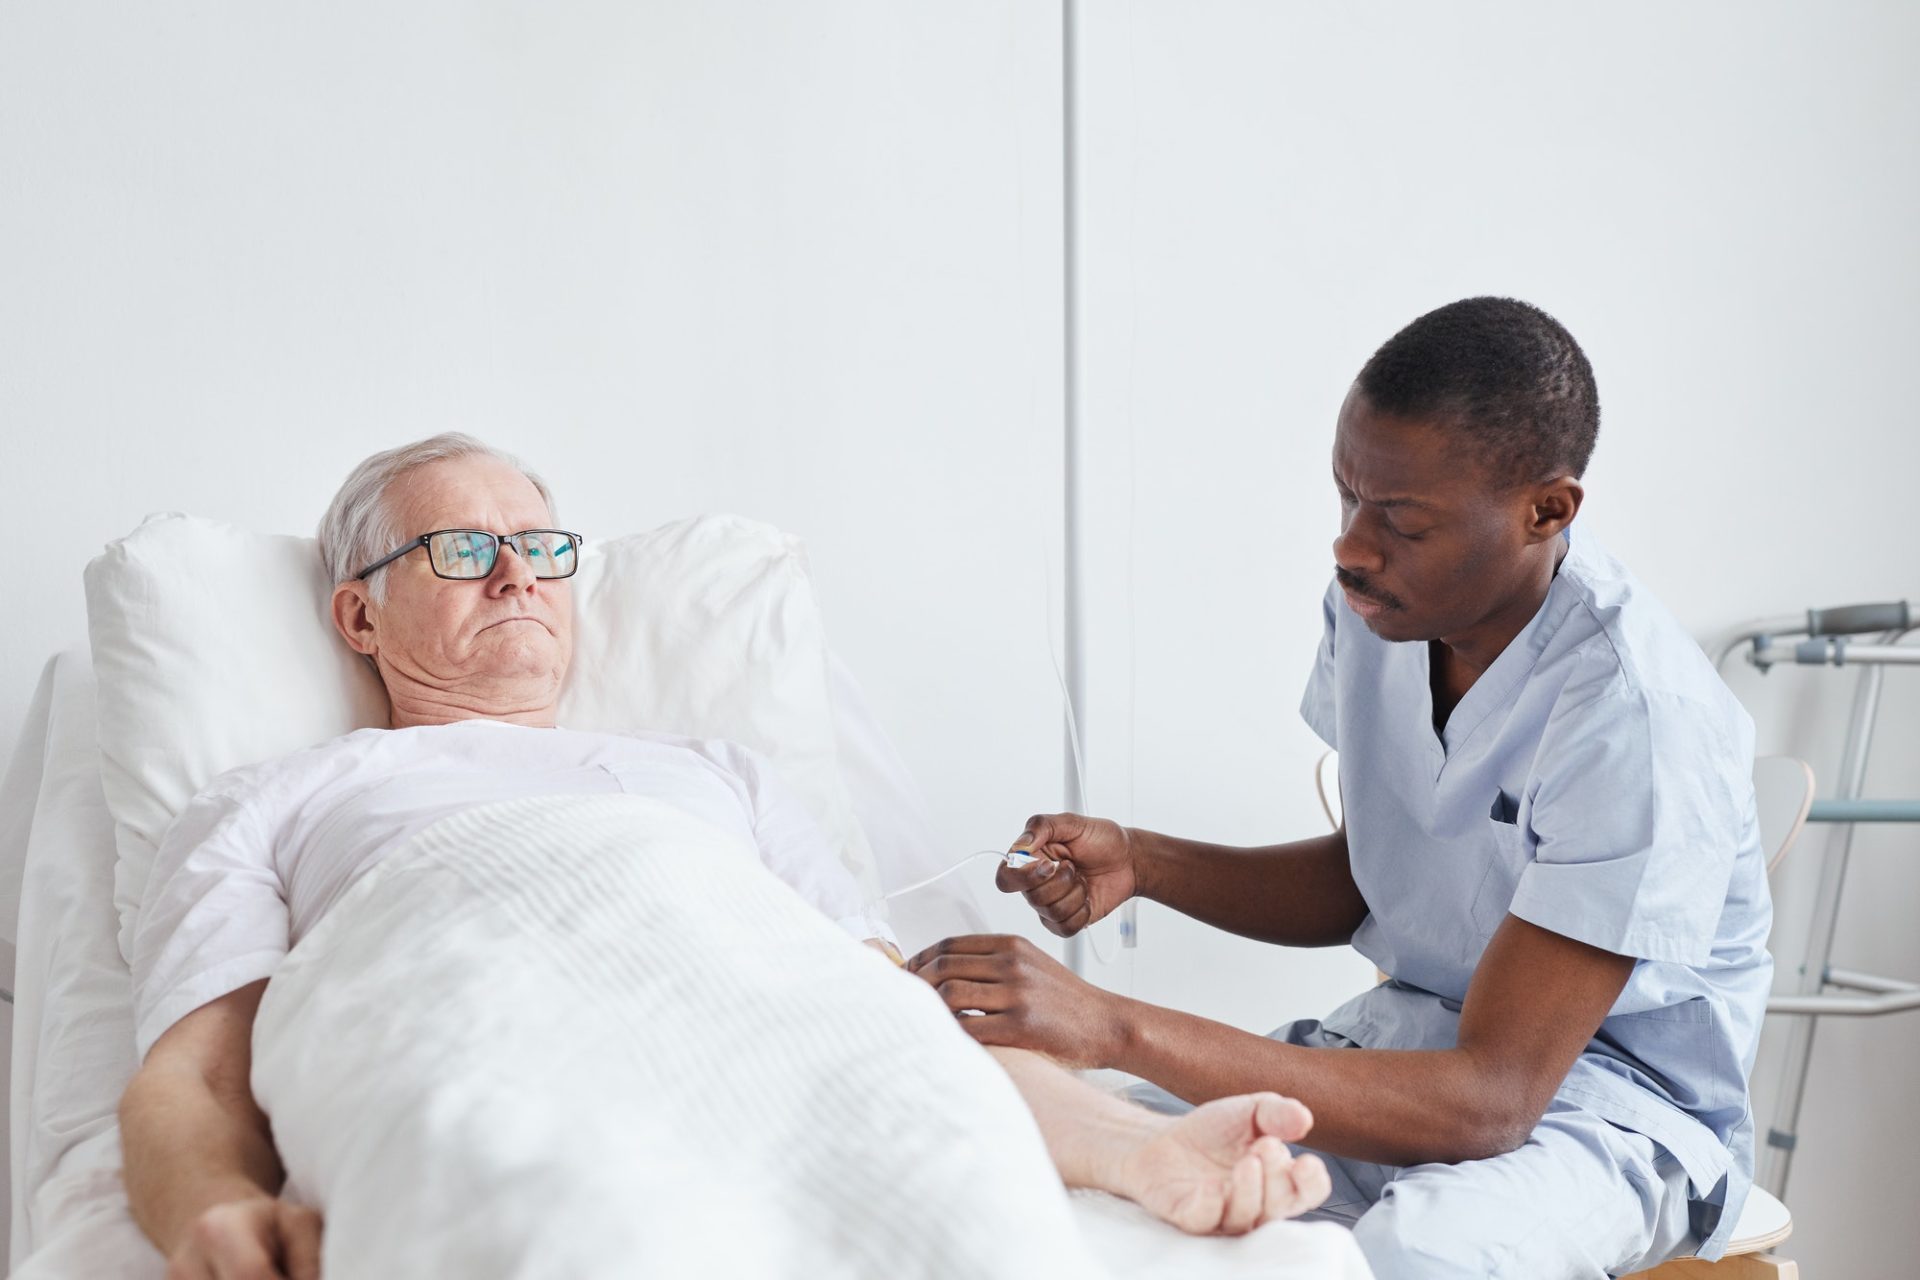 Male Nurse Caring for Patient